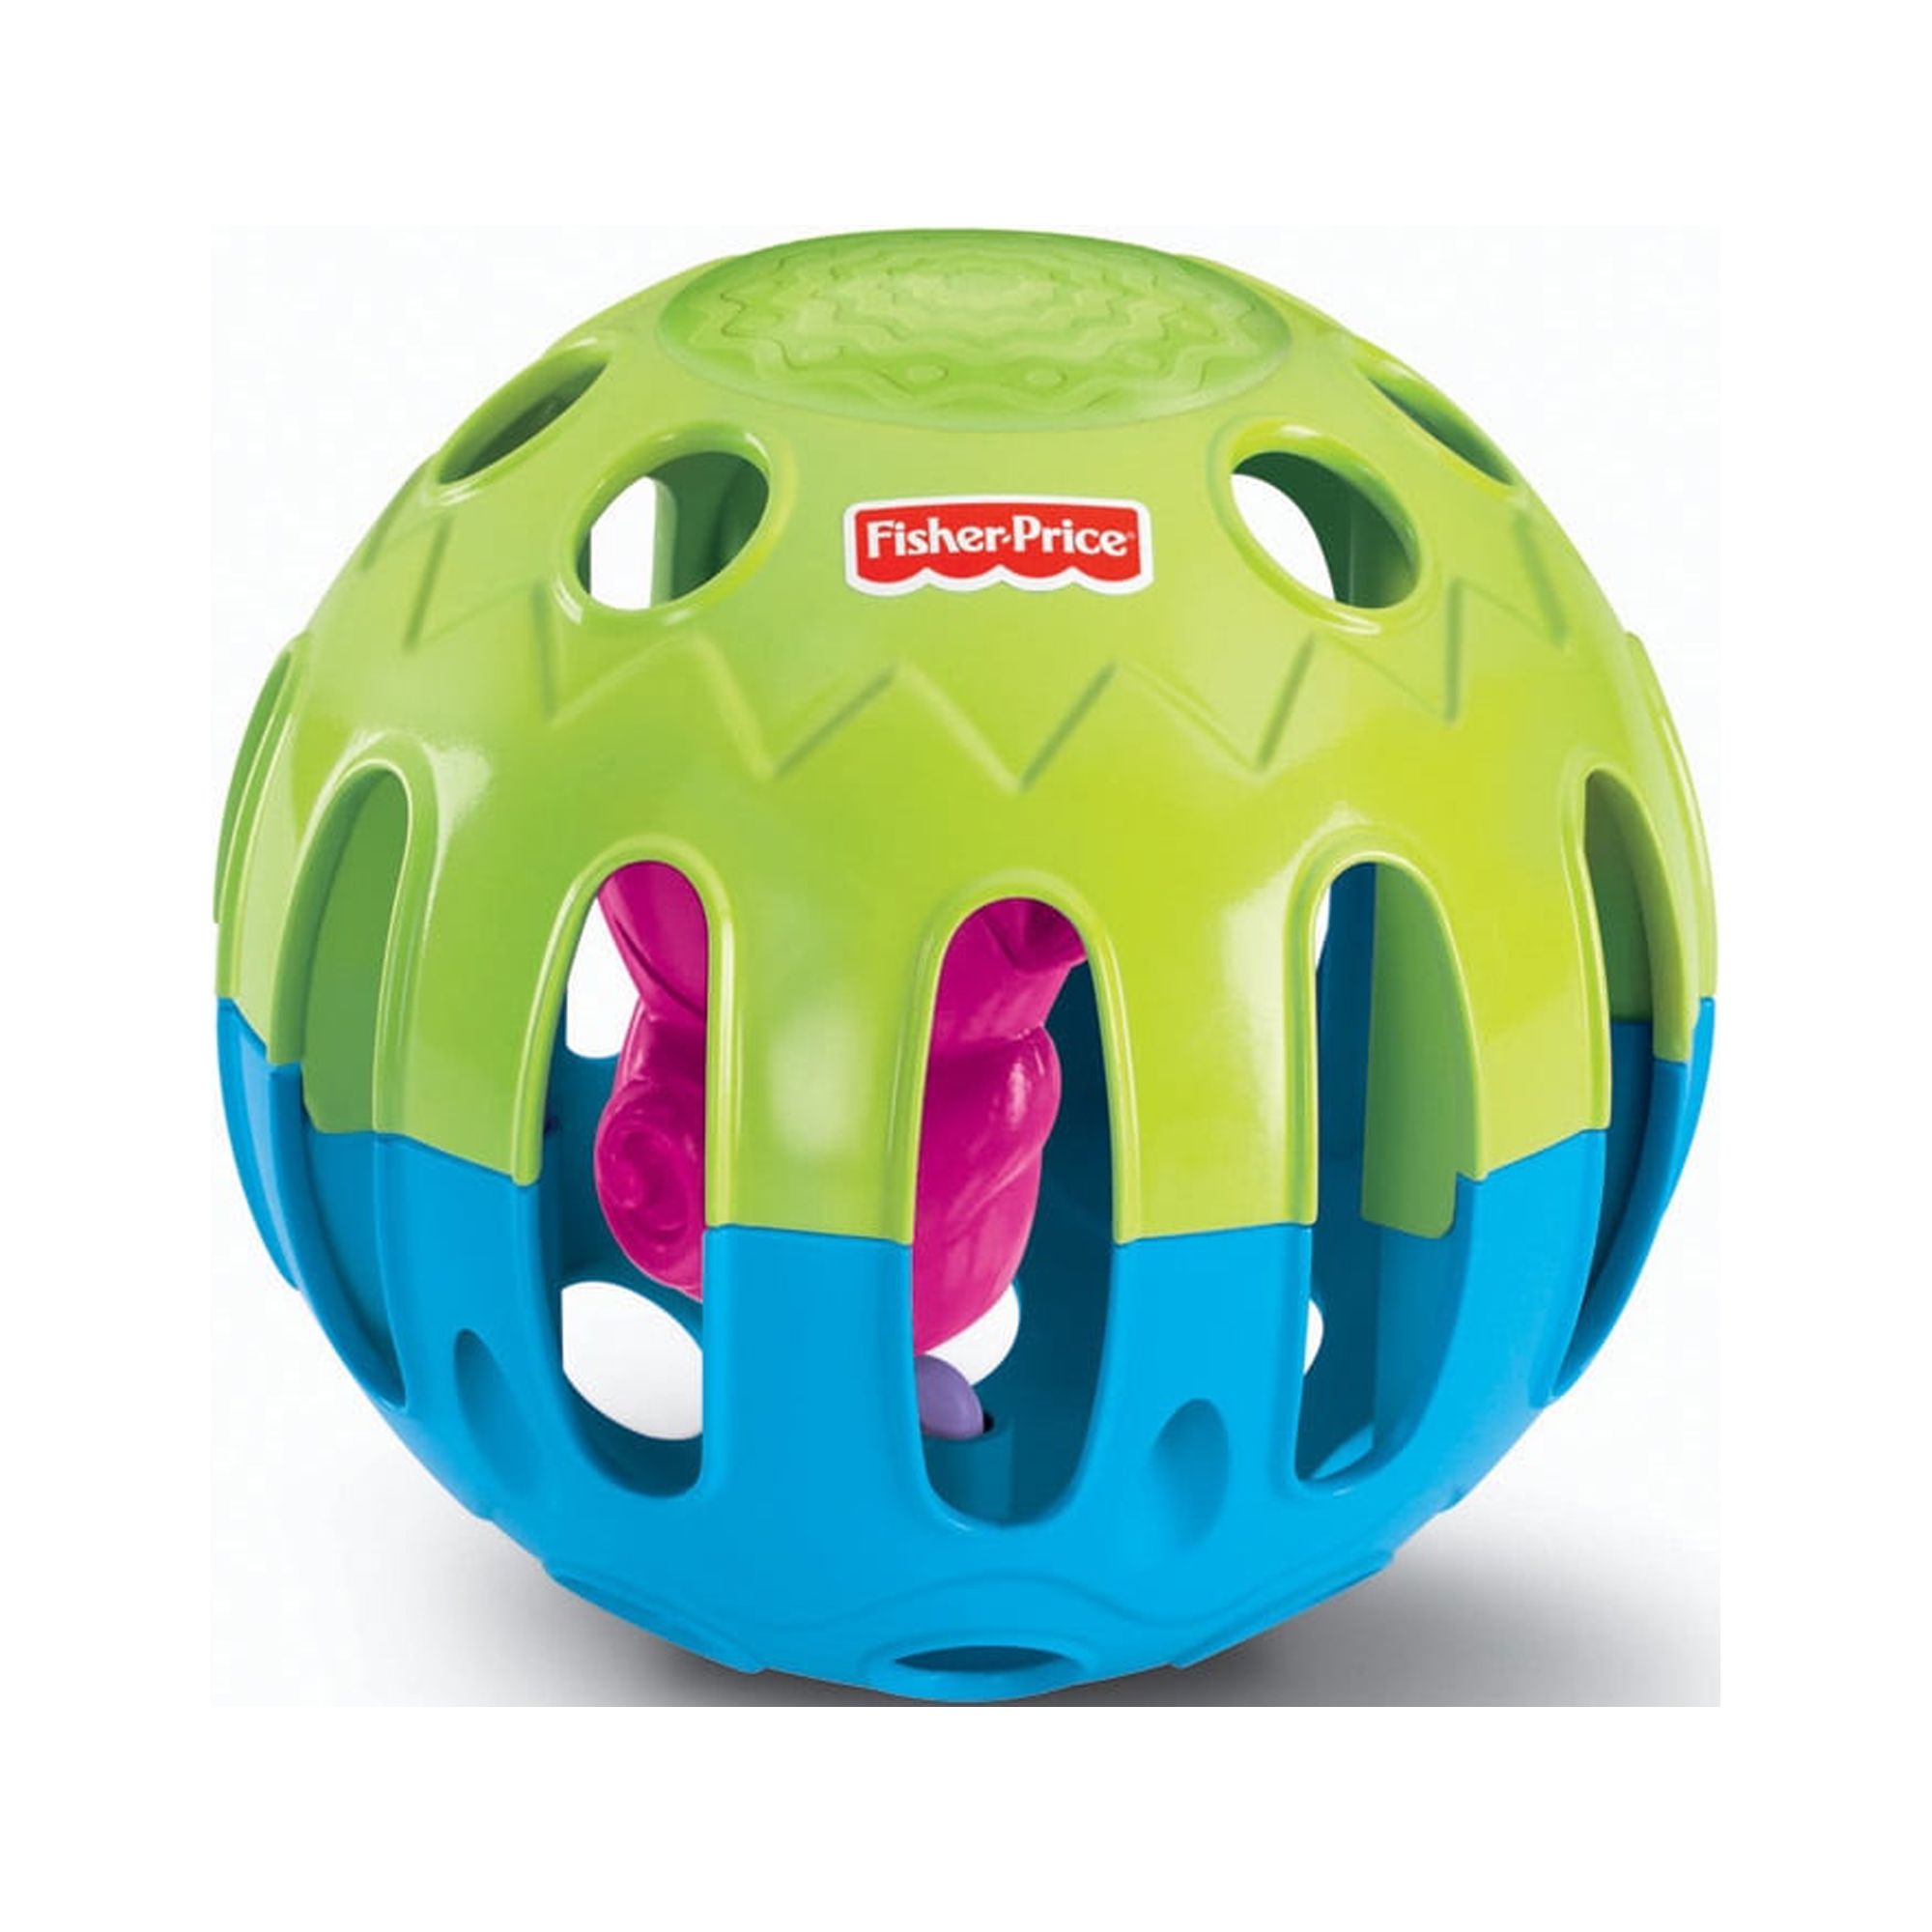 Fisher-Price Growing Baby Clutch Ball - image 1 of 2